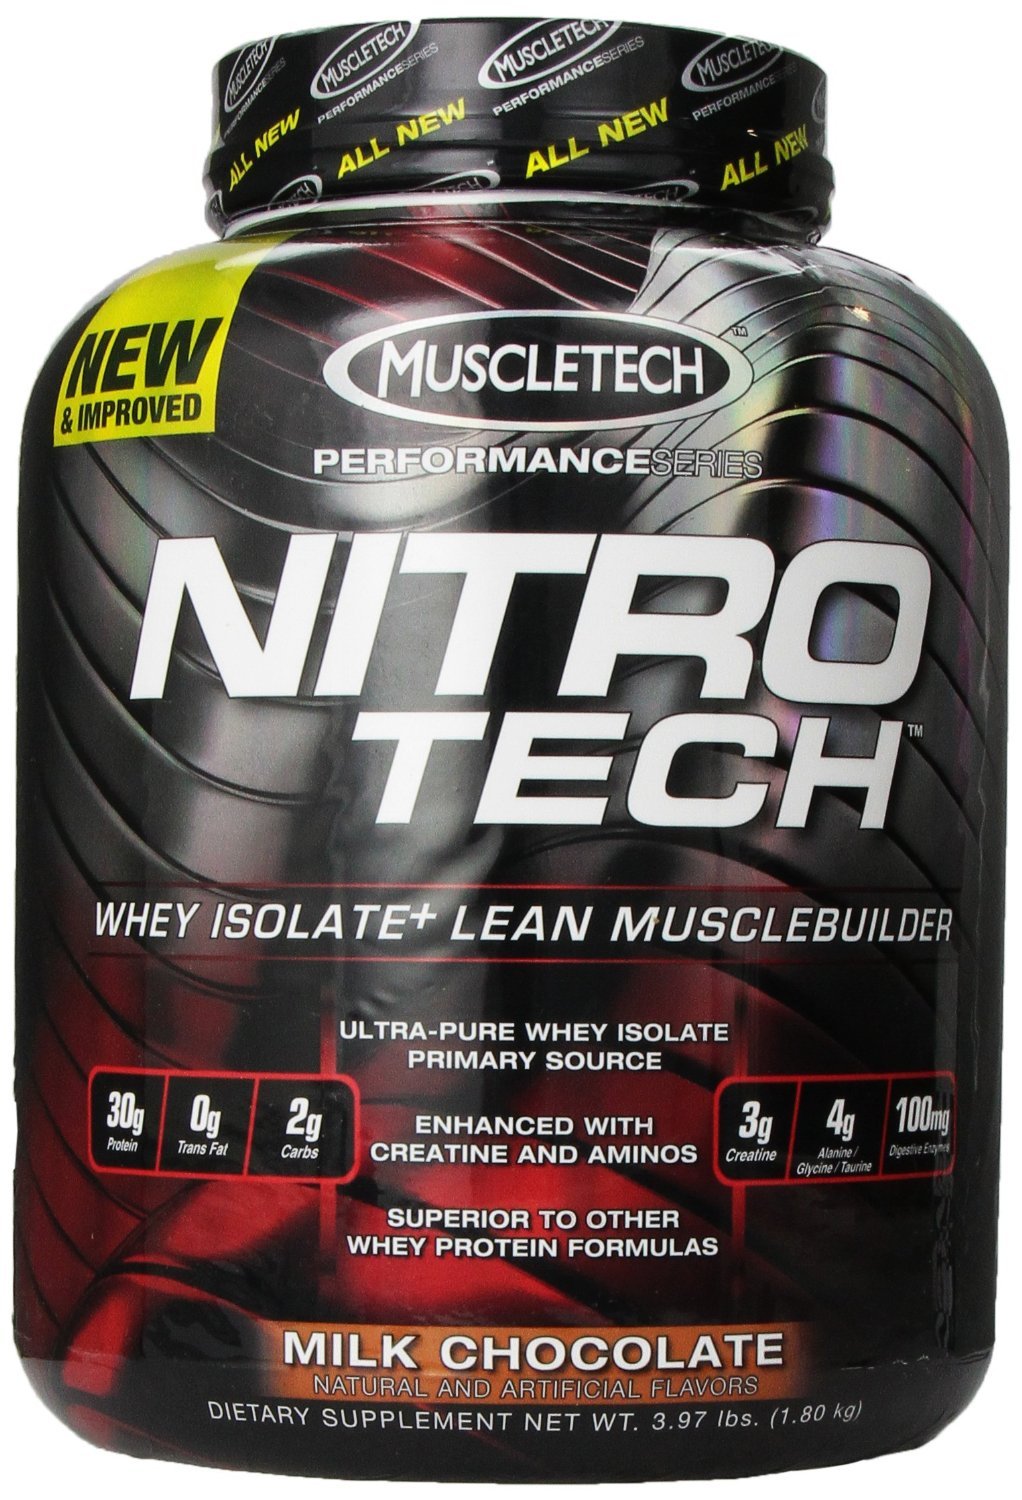 Nitro Tech Performance Series, 1800 g, MuscleTech. Whey Isolate. Lean muscle mass Weight Loss recovery Anti-catabolic properties 